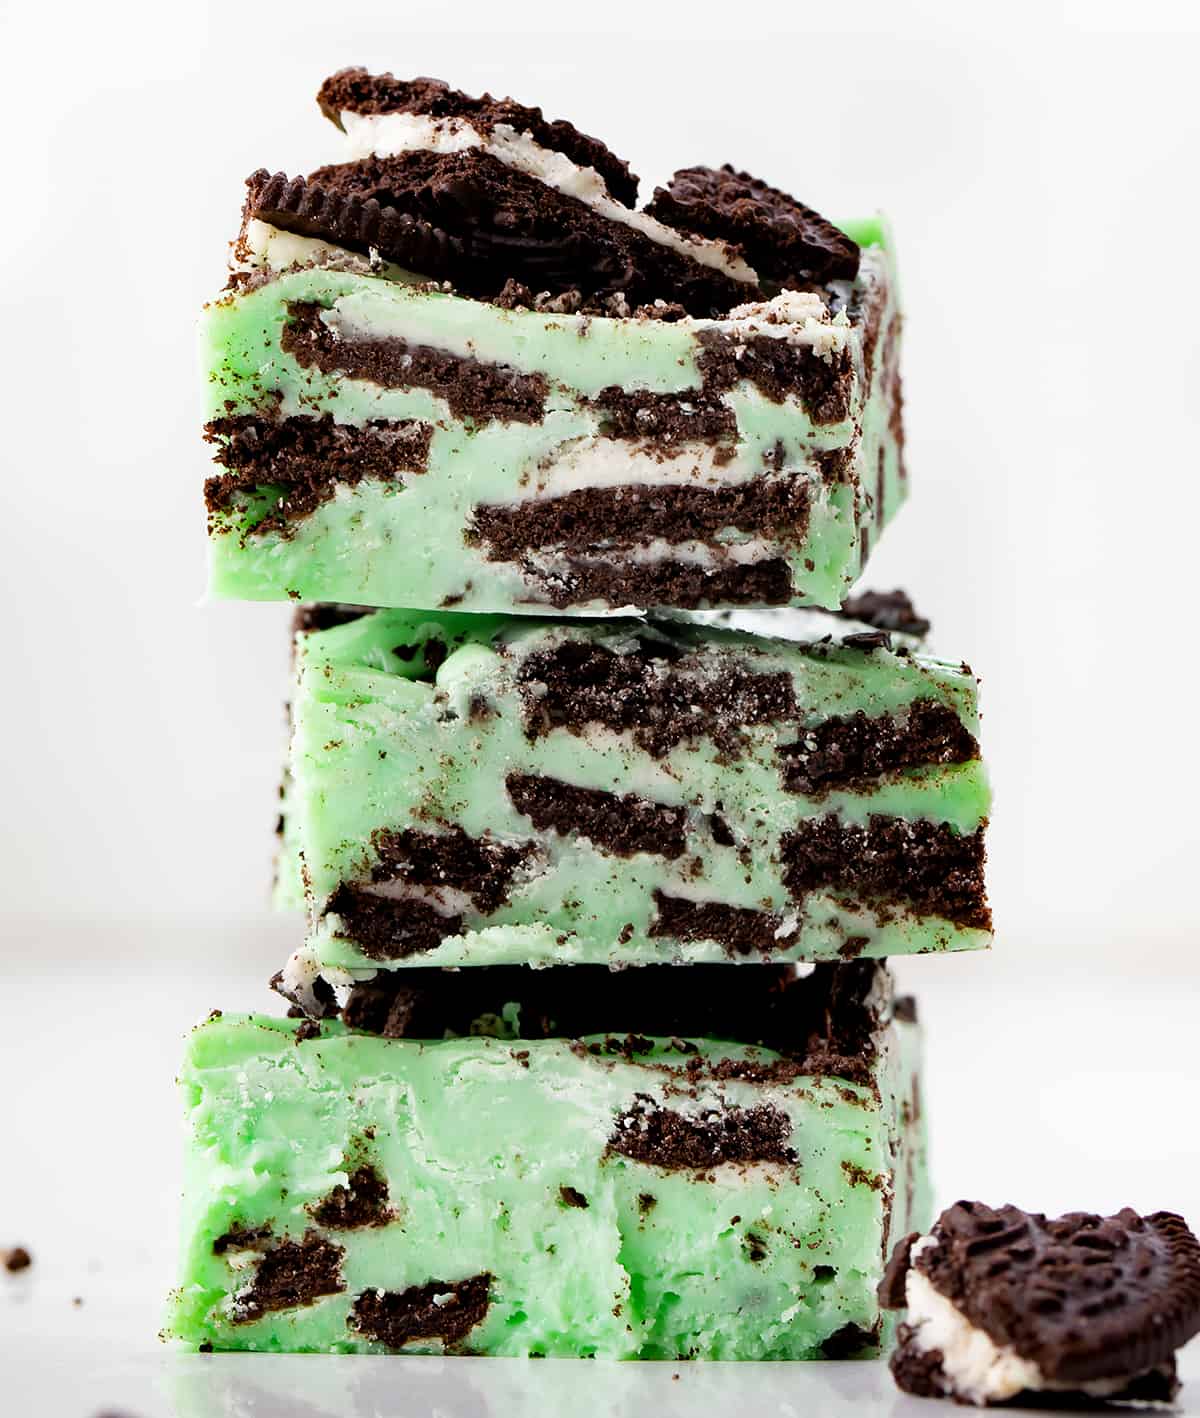 Stack of Mint Oreo Fudge Pieces on a White Counter.